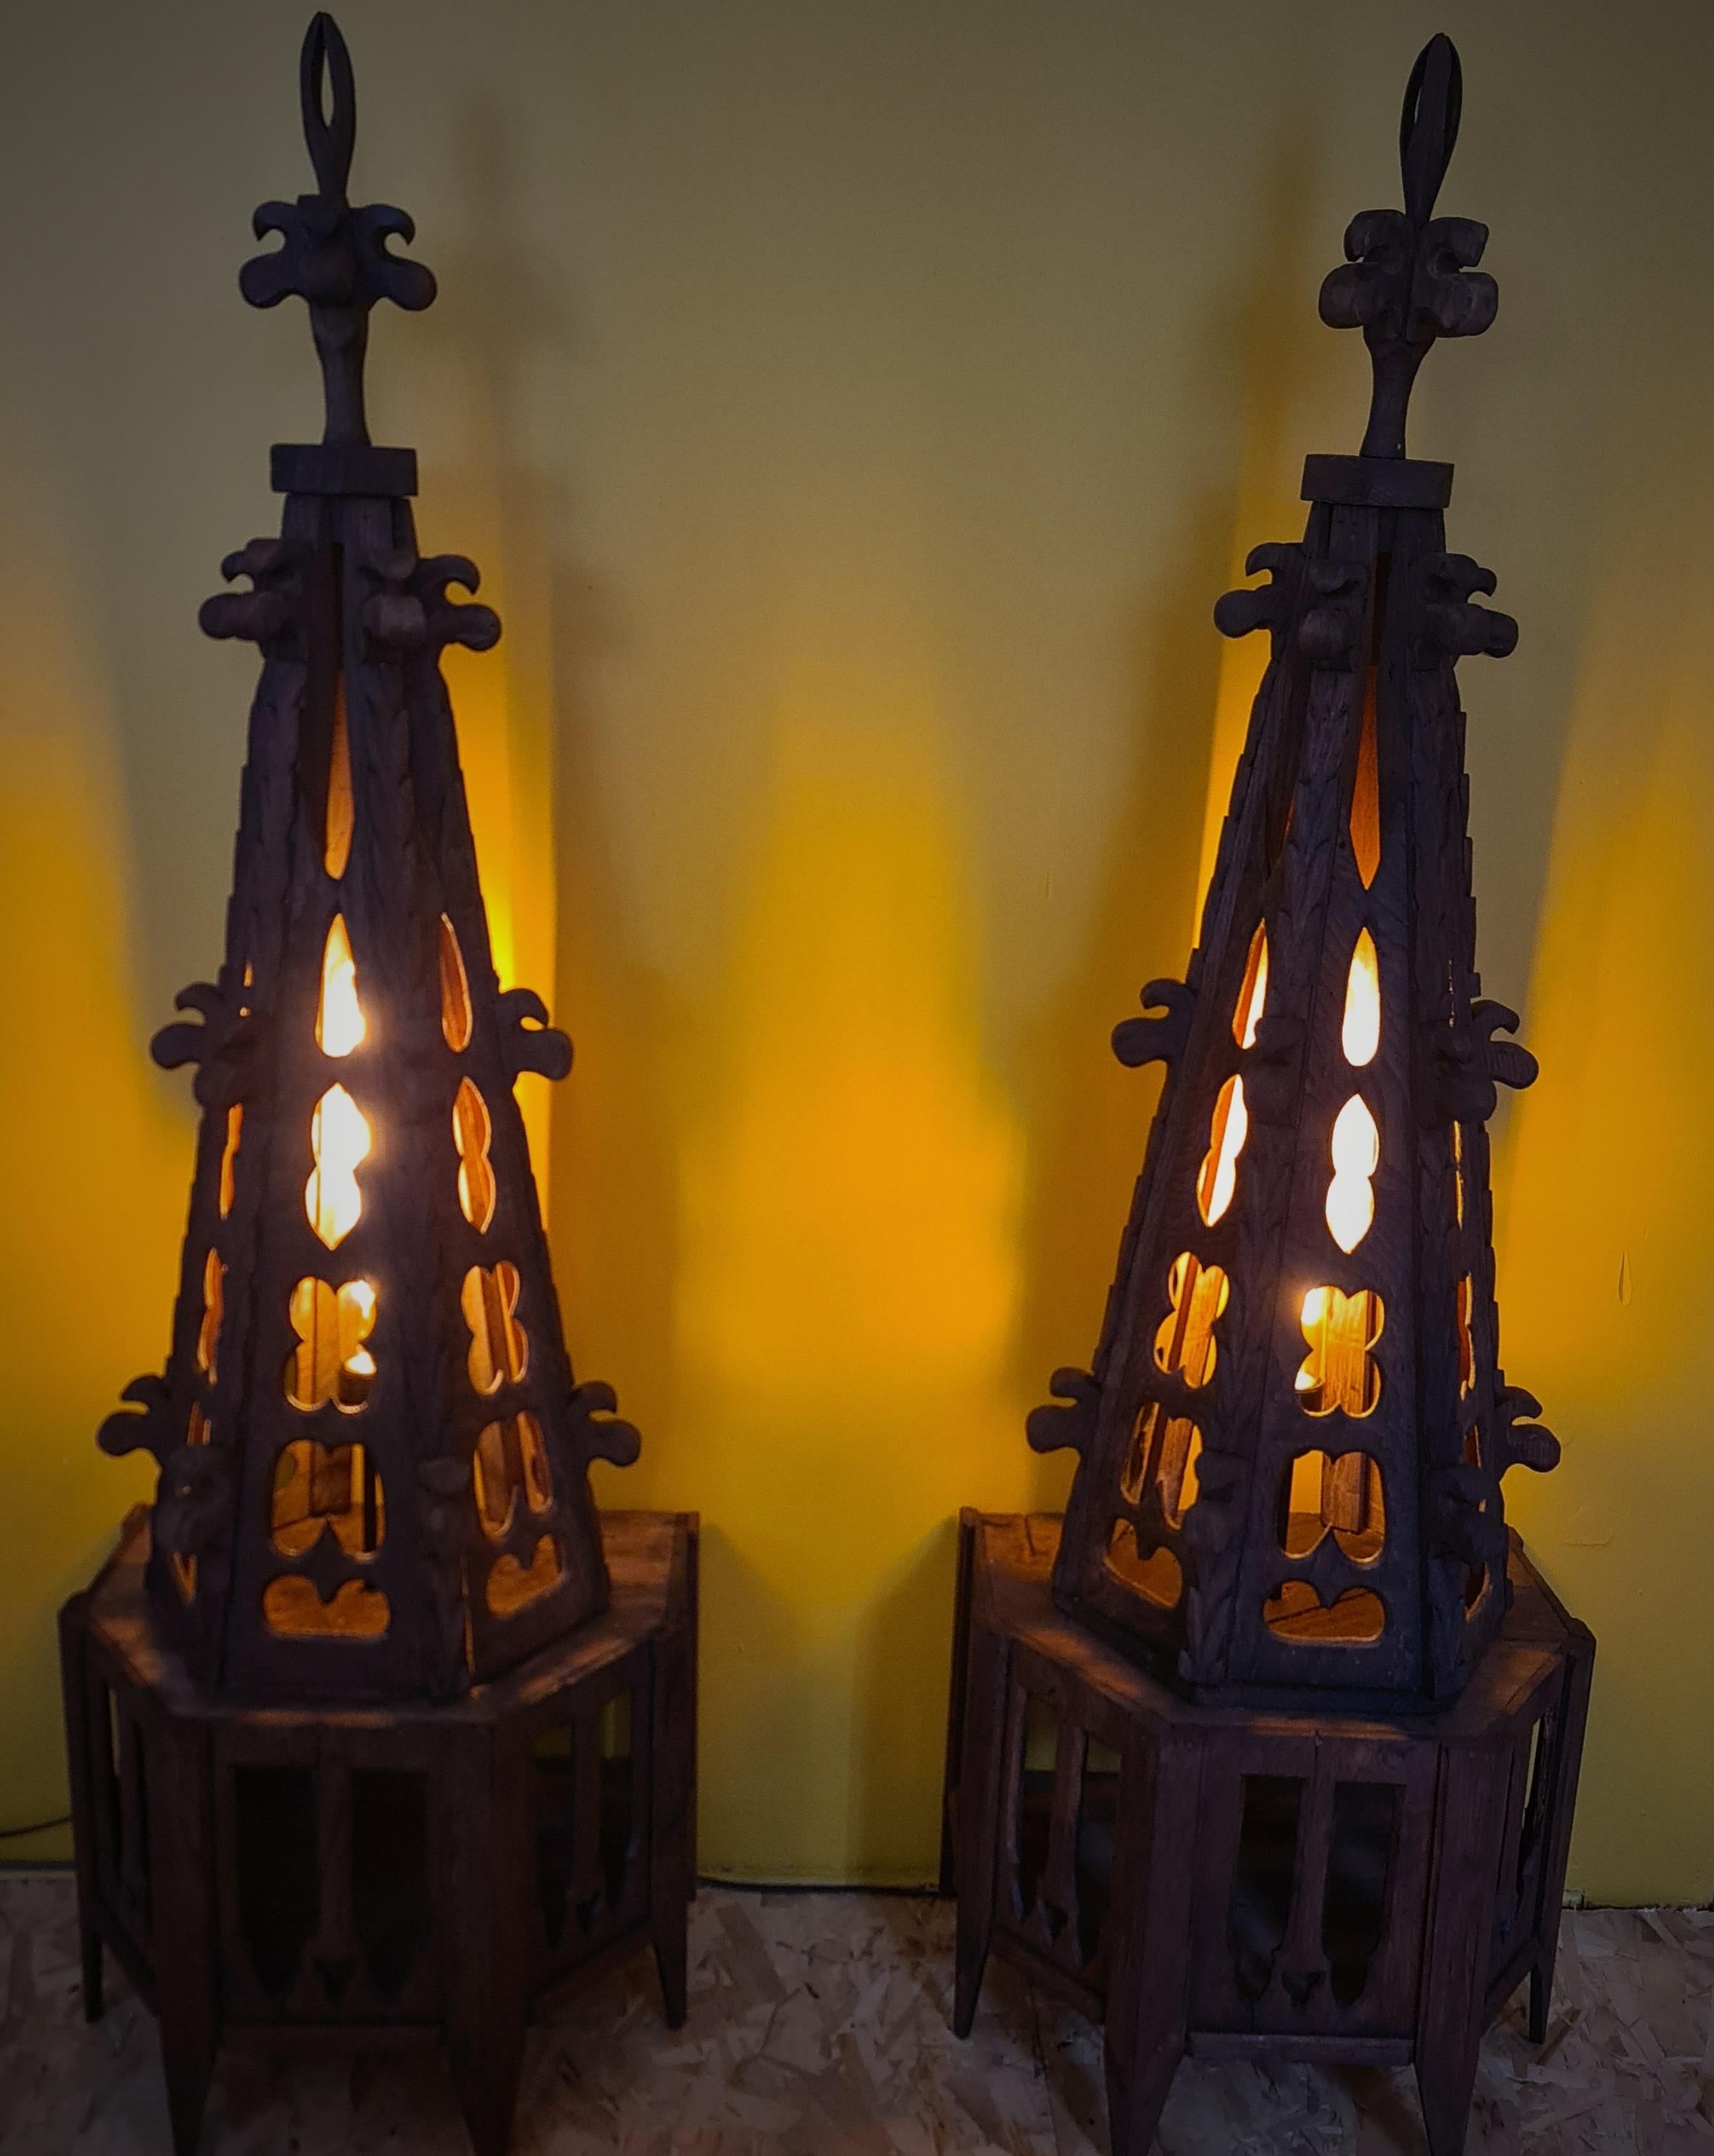 Gothic Element of church decoration, Pinnacle transformed into a lamp